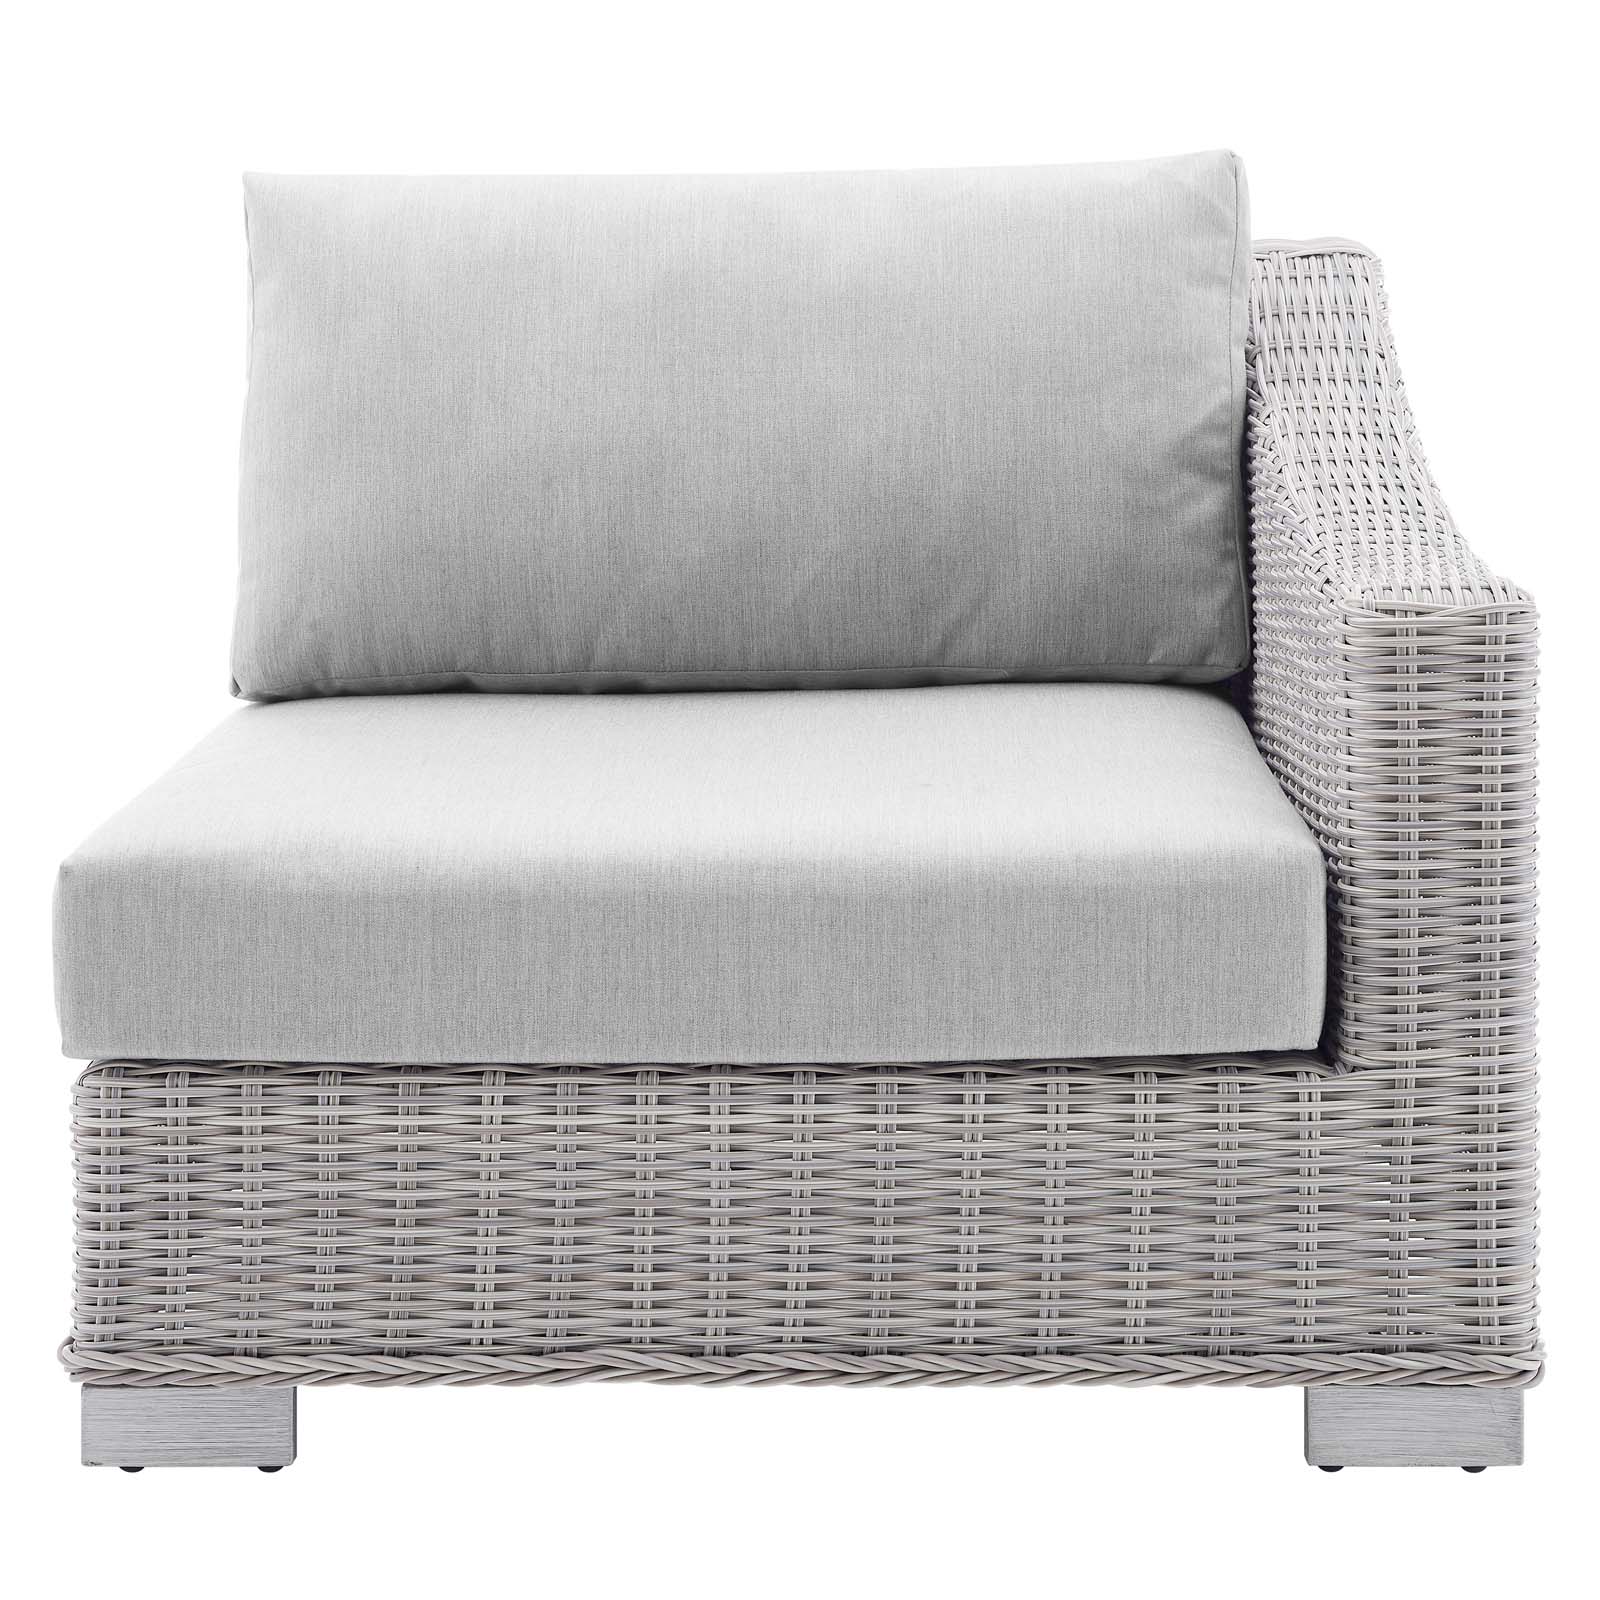 Modway Conway Sunbrella® Outdoor Patio Wicker Rattan Right-Arm Chair in Light Gray Gray - image 5 of 9